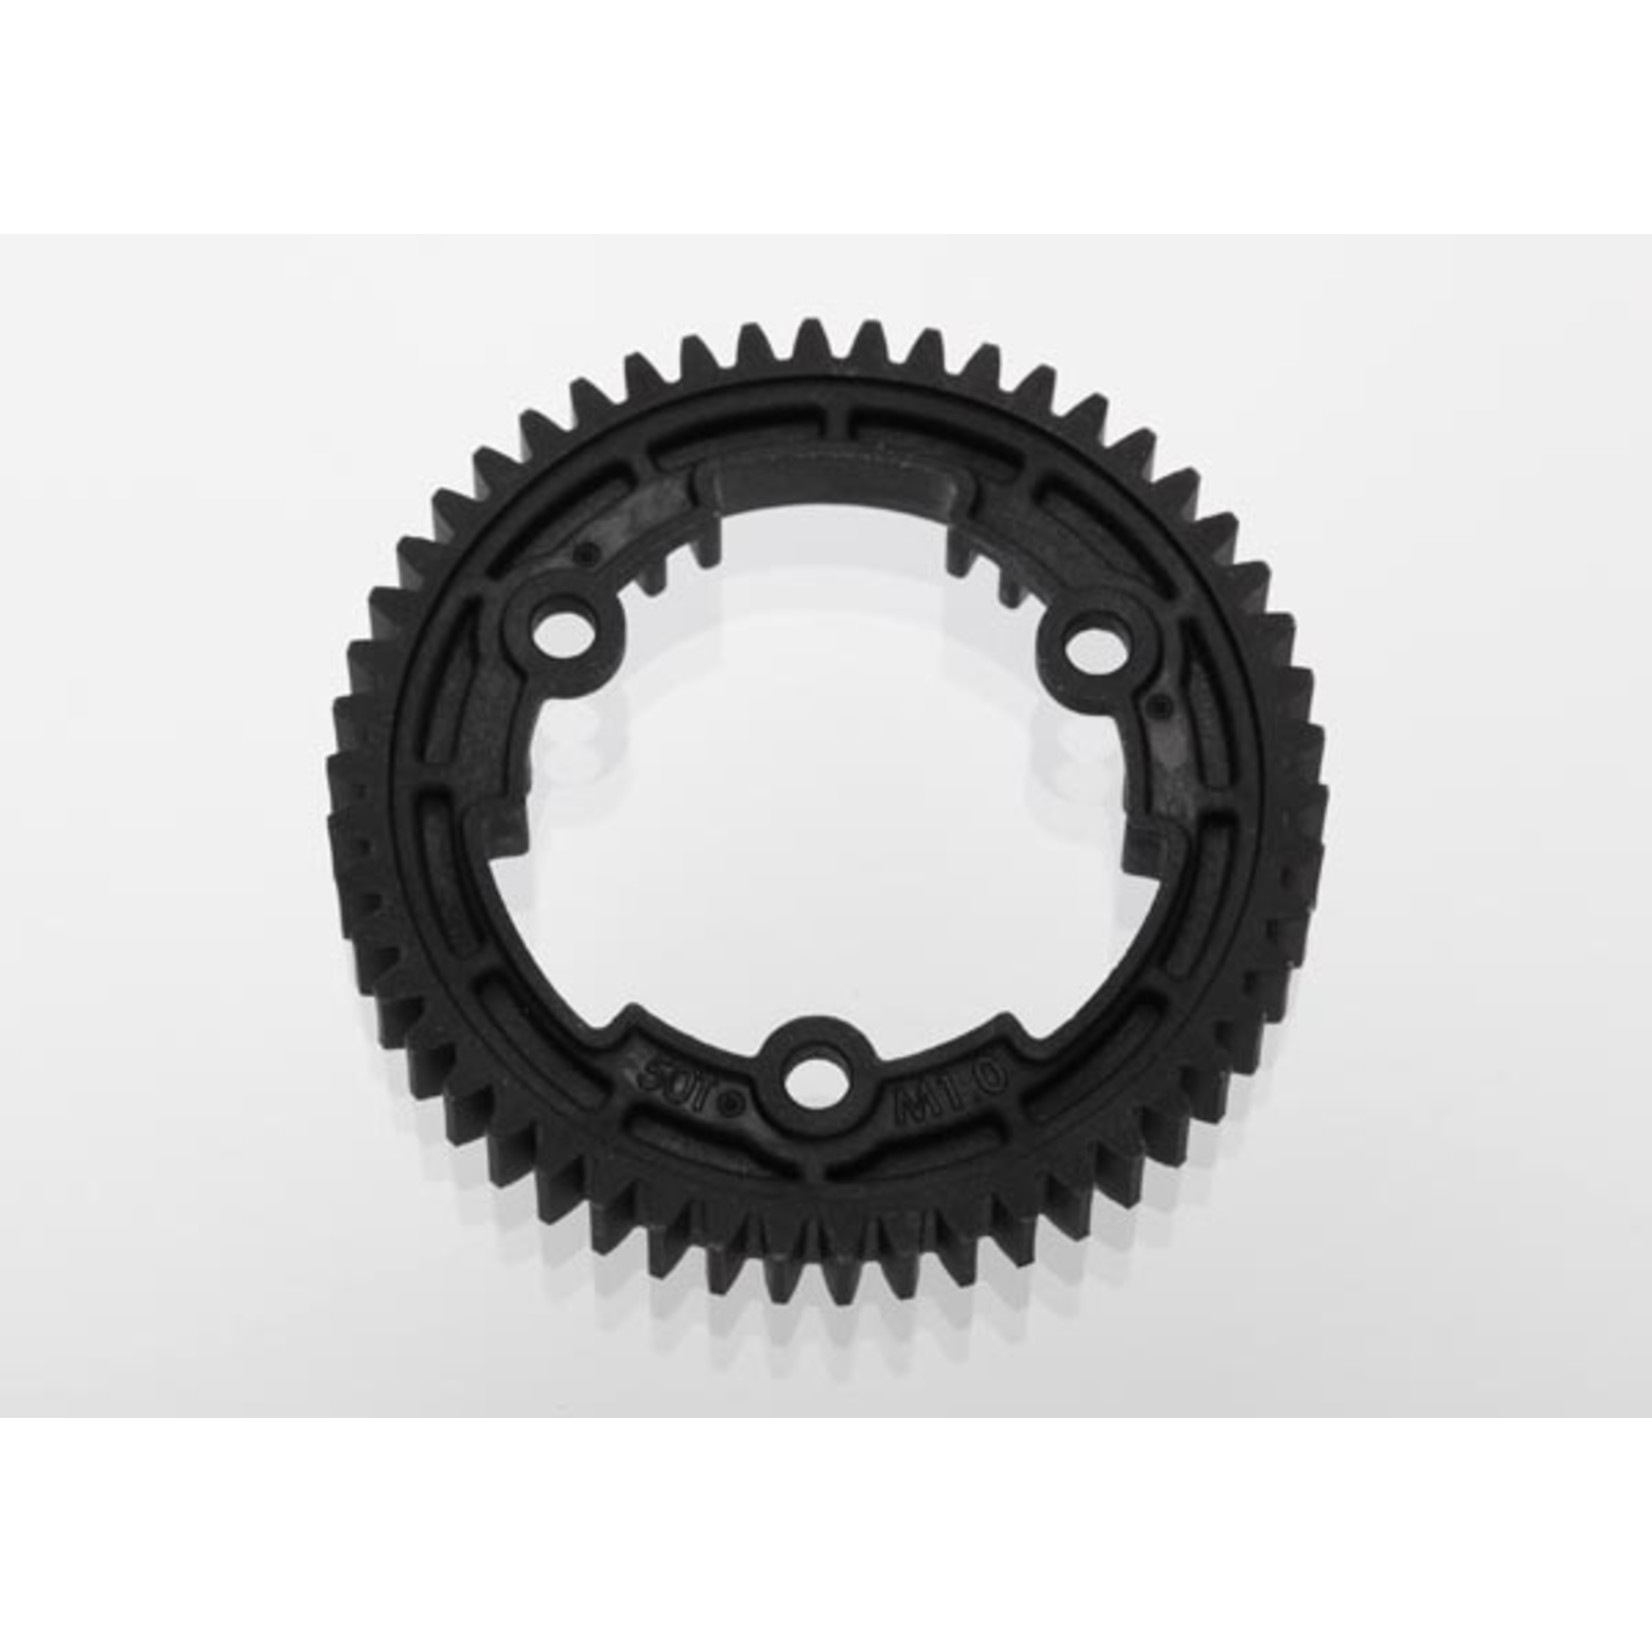 Traxxas 6448 - Spur Gear, 50-tooth (1.0 metric pitch)